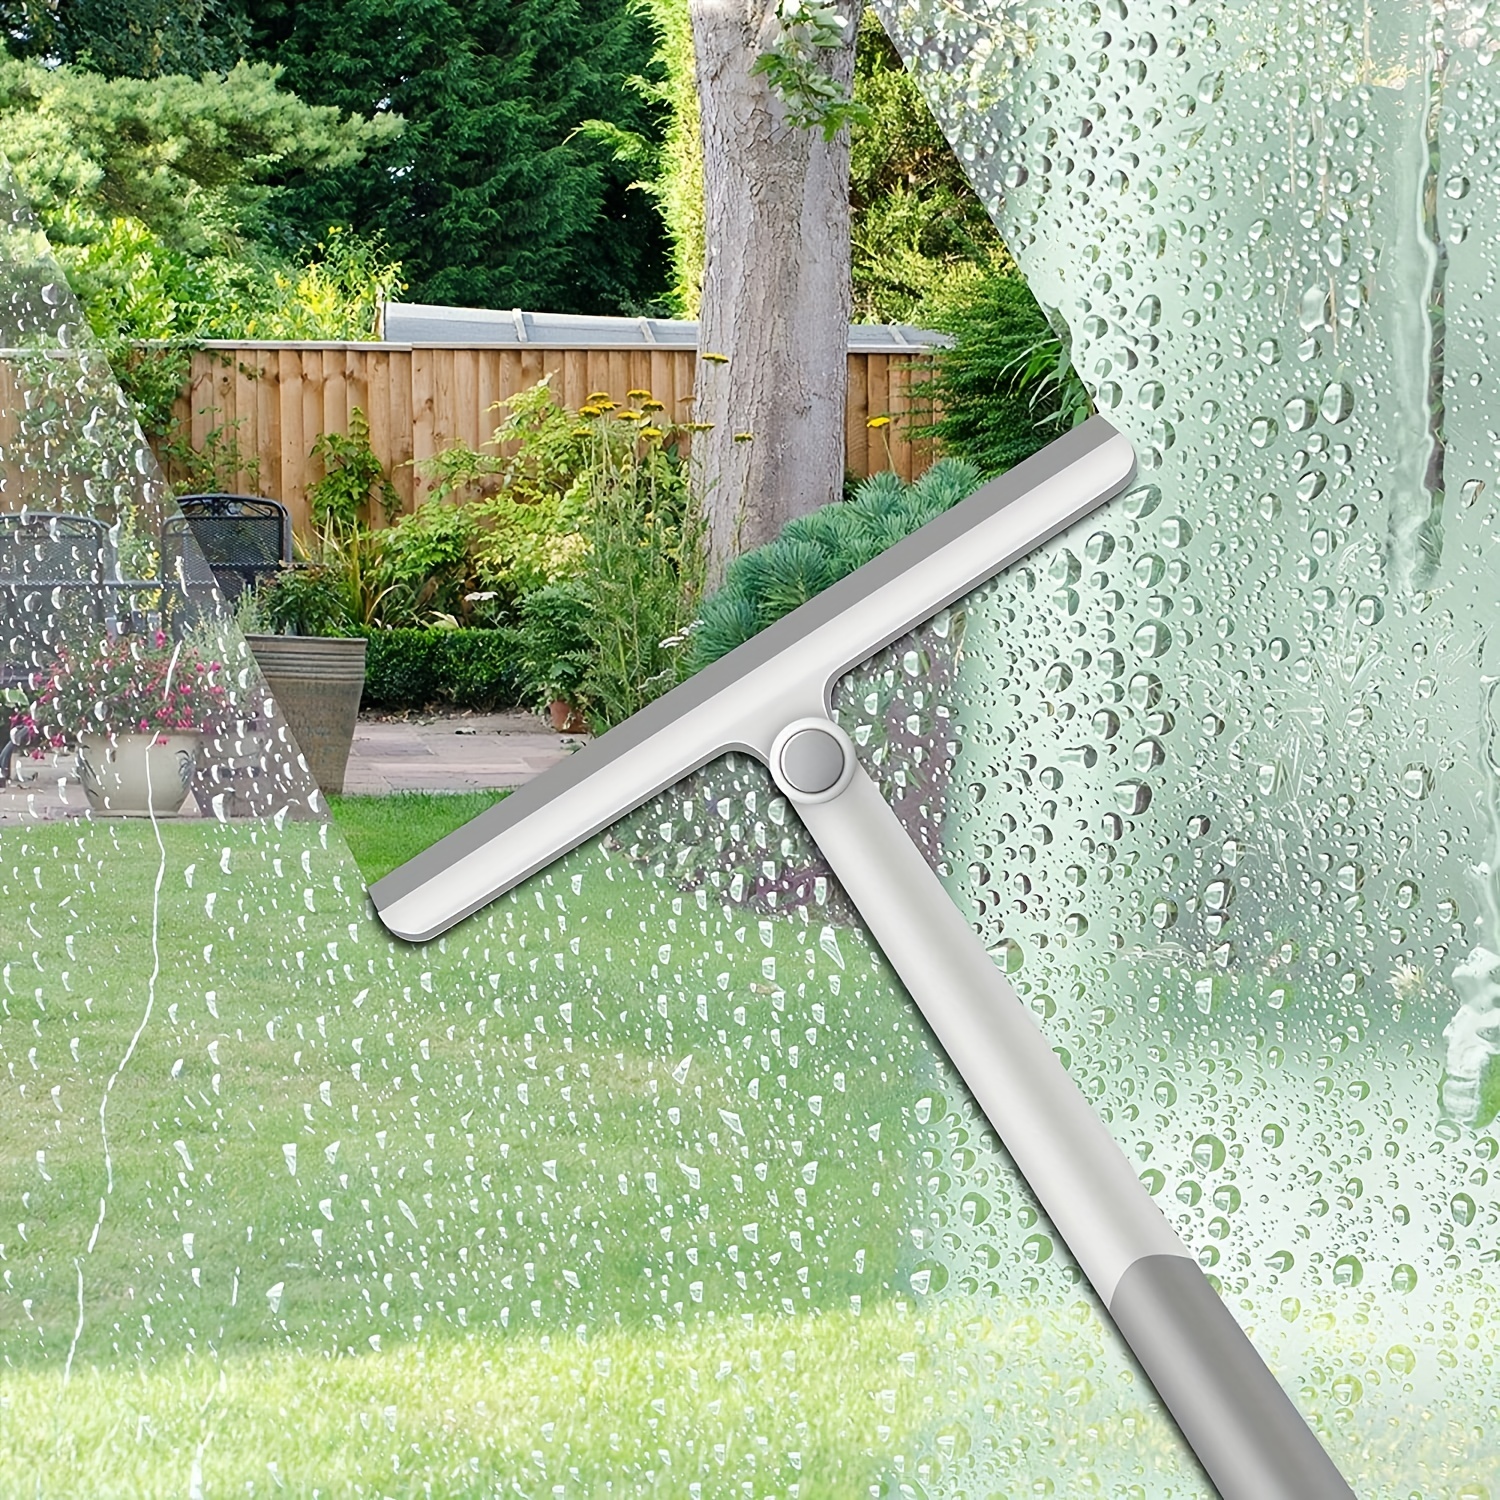 Shower Squeegee, Shower Squeegee With Holder, Silicon Shower